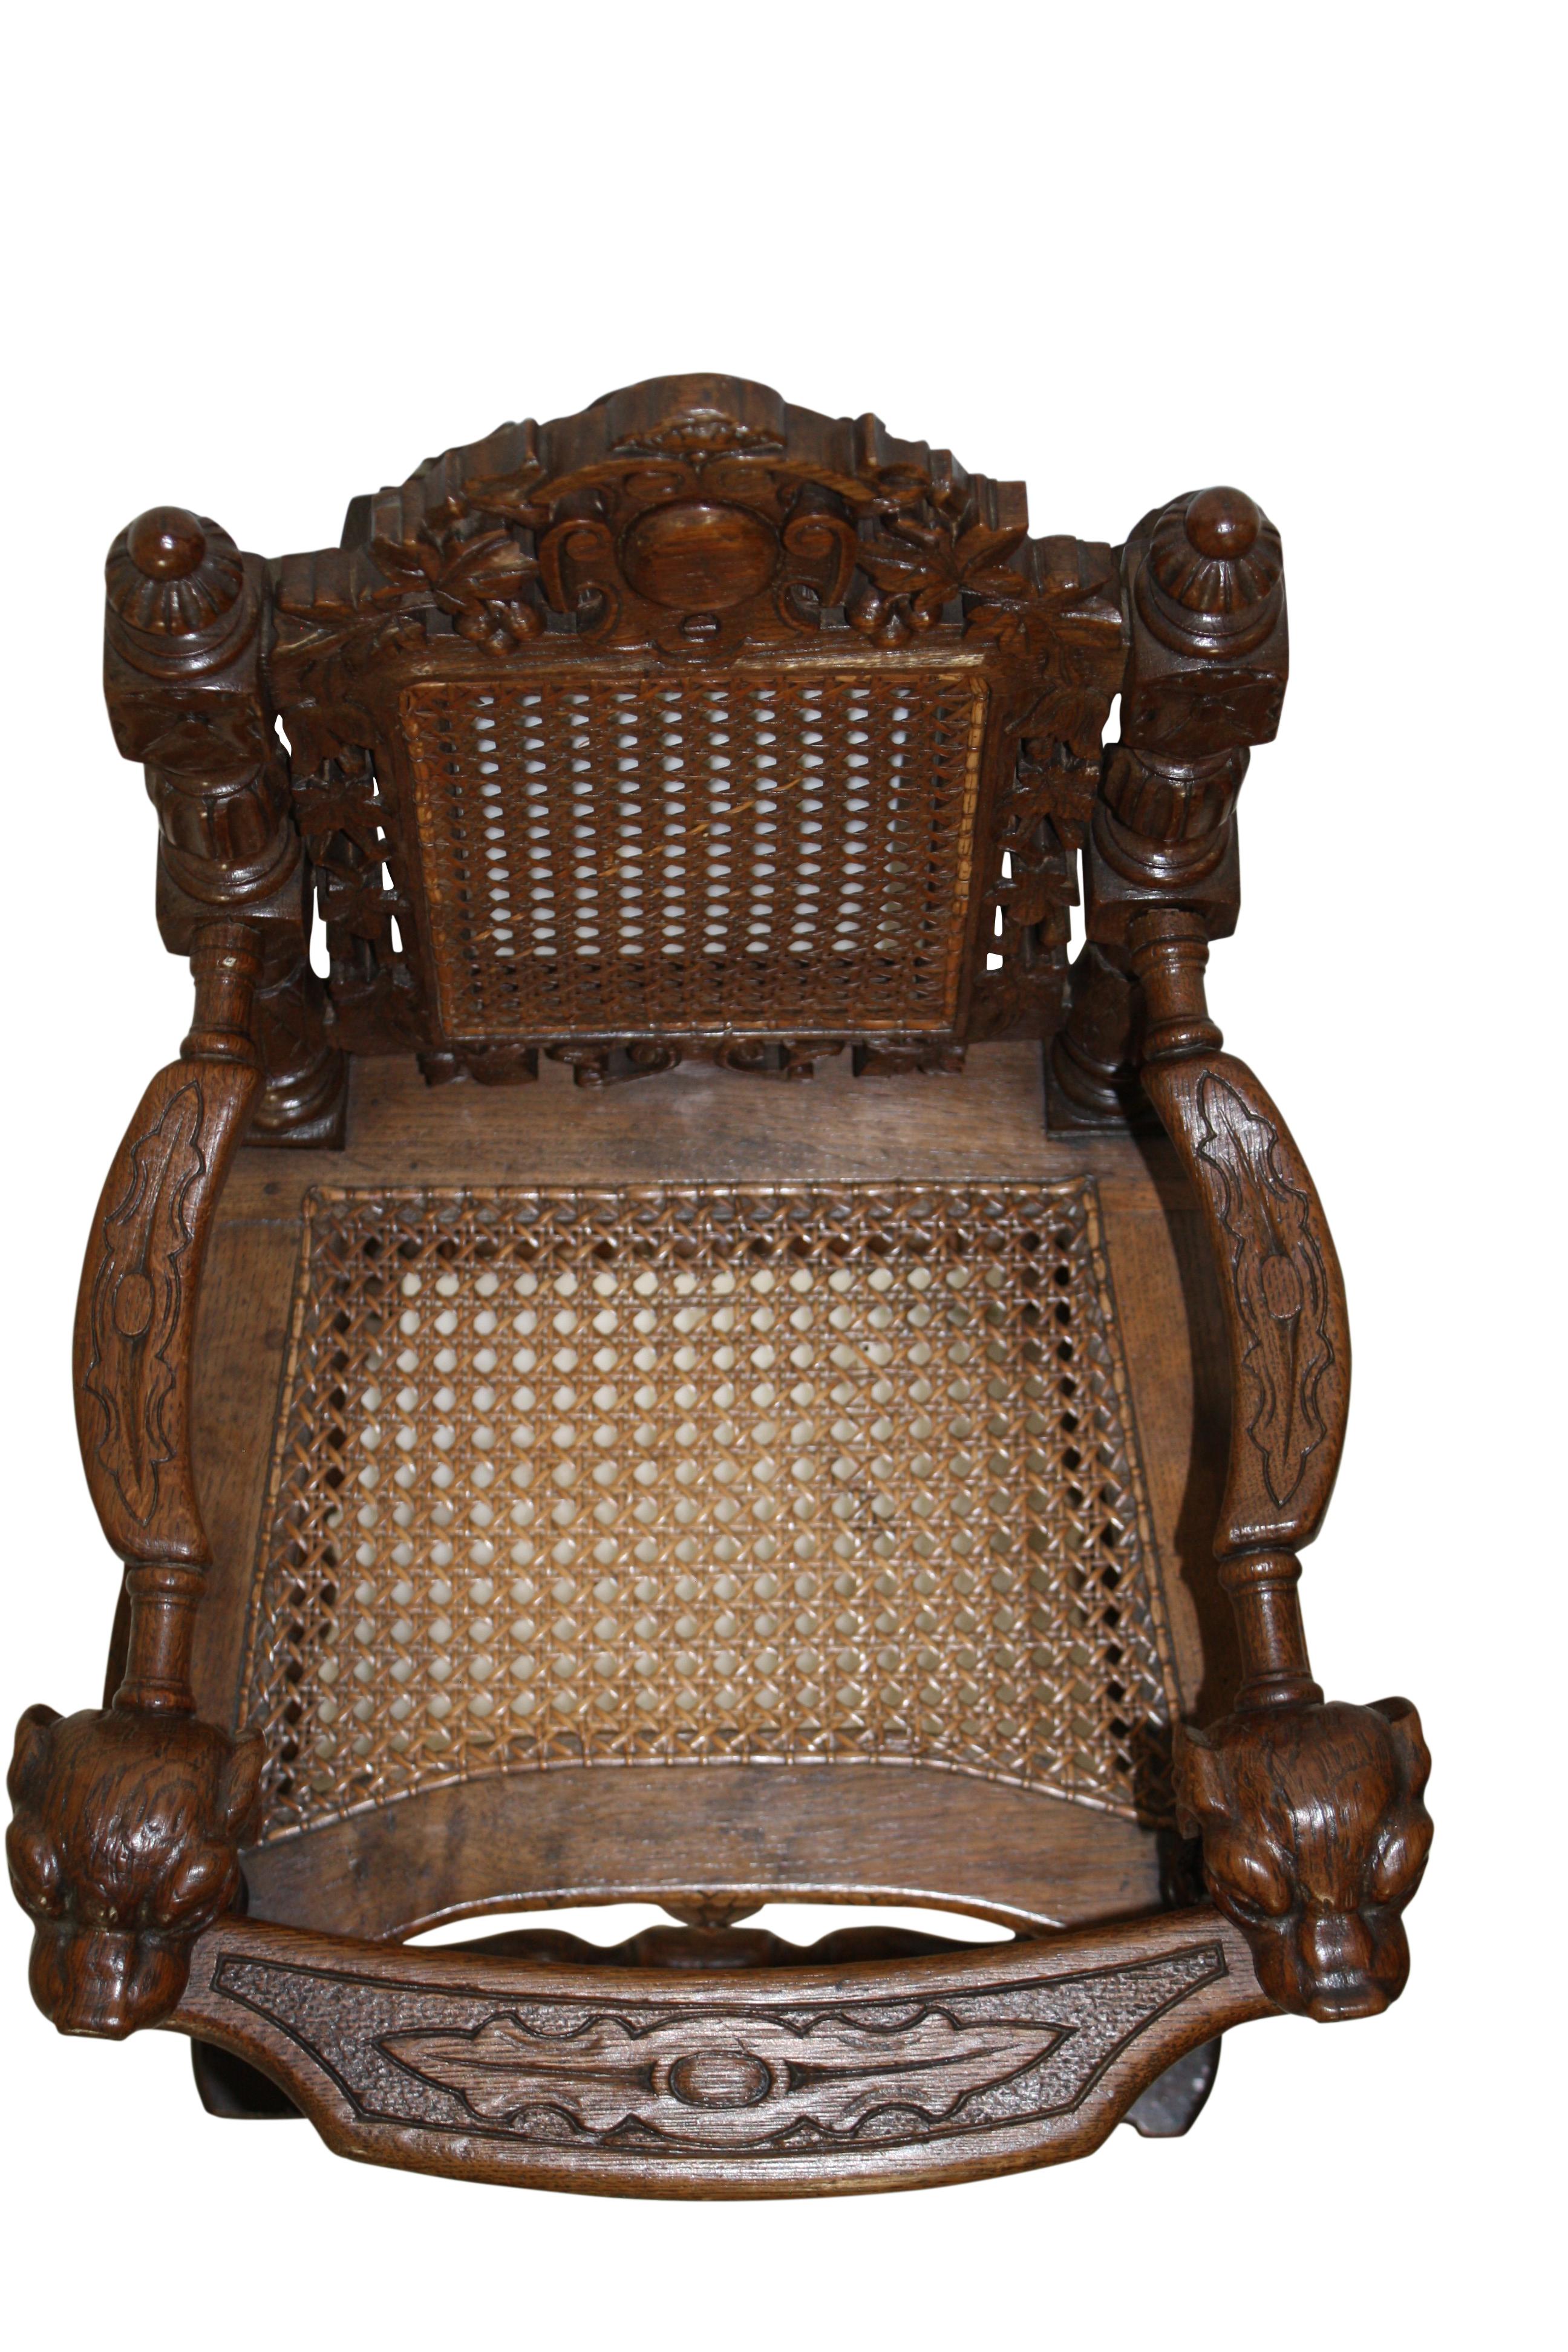 European Carved Oak Child's Chair with Caning, circa 1880